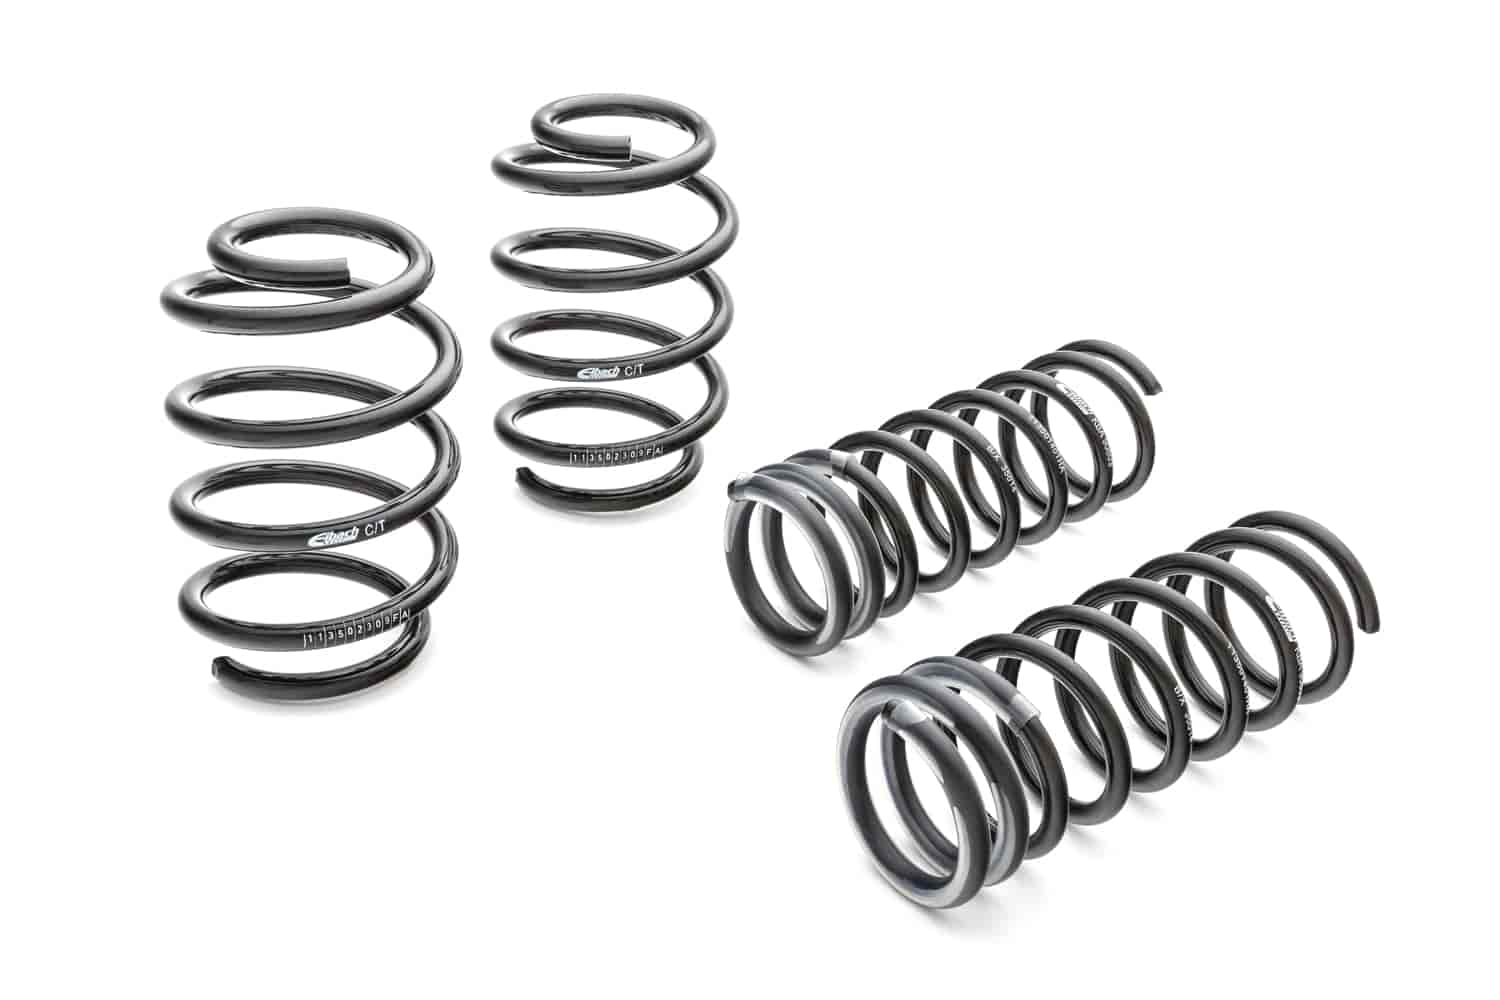 15115.140 Pro-Kit Lowering Springs 2010-2016 Audi A5 Convertible - 1 in. Front/.600 in. Rear Drop